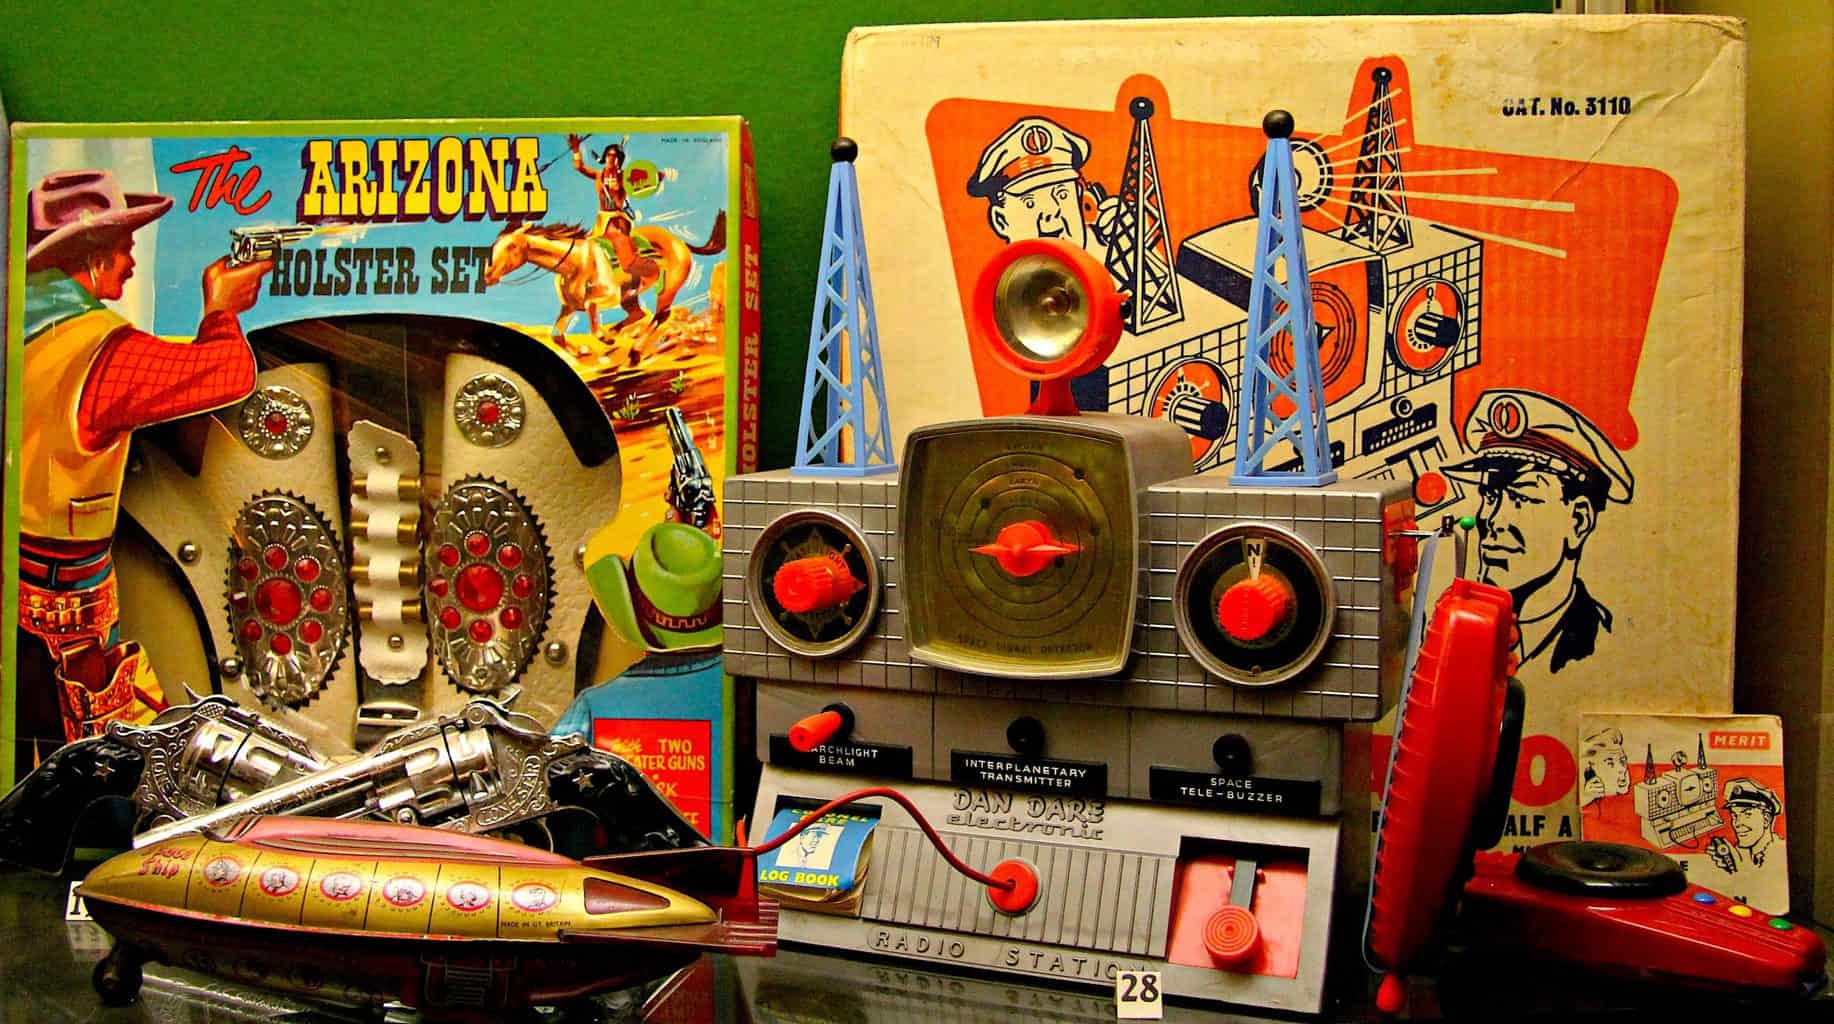 Some of the vintage toys for boys you'll find at the Edinburgh Museum of Childhood. Image sourced from Colin Gould on Flickr.com